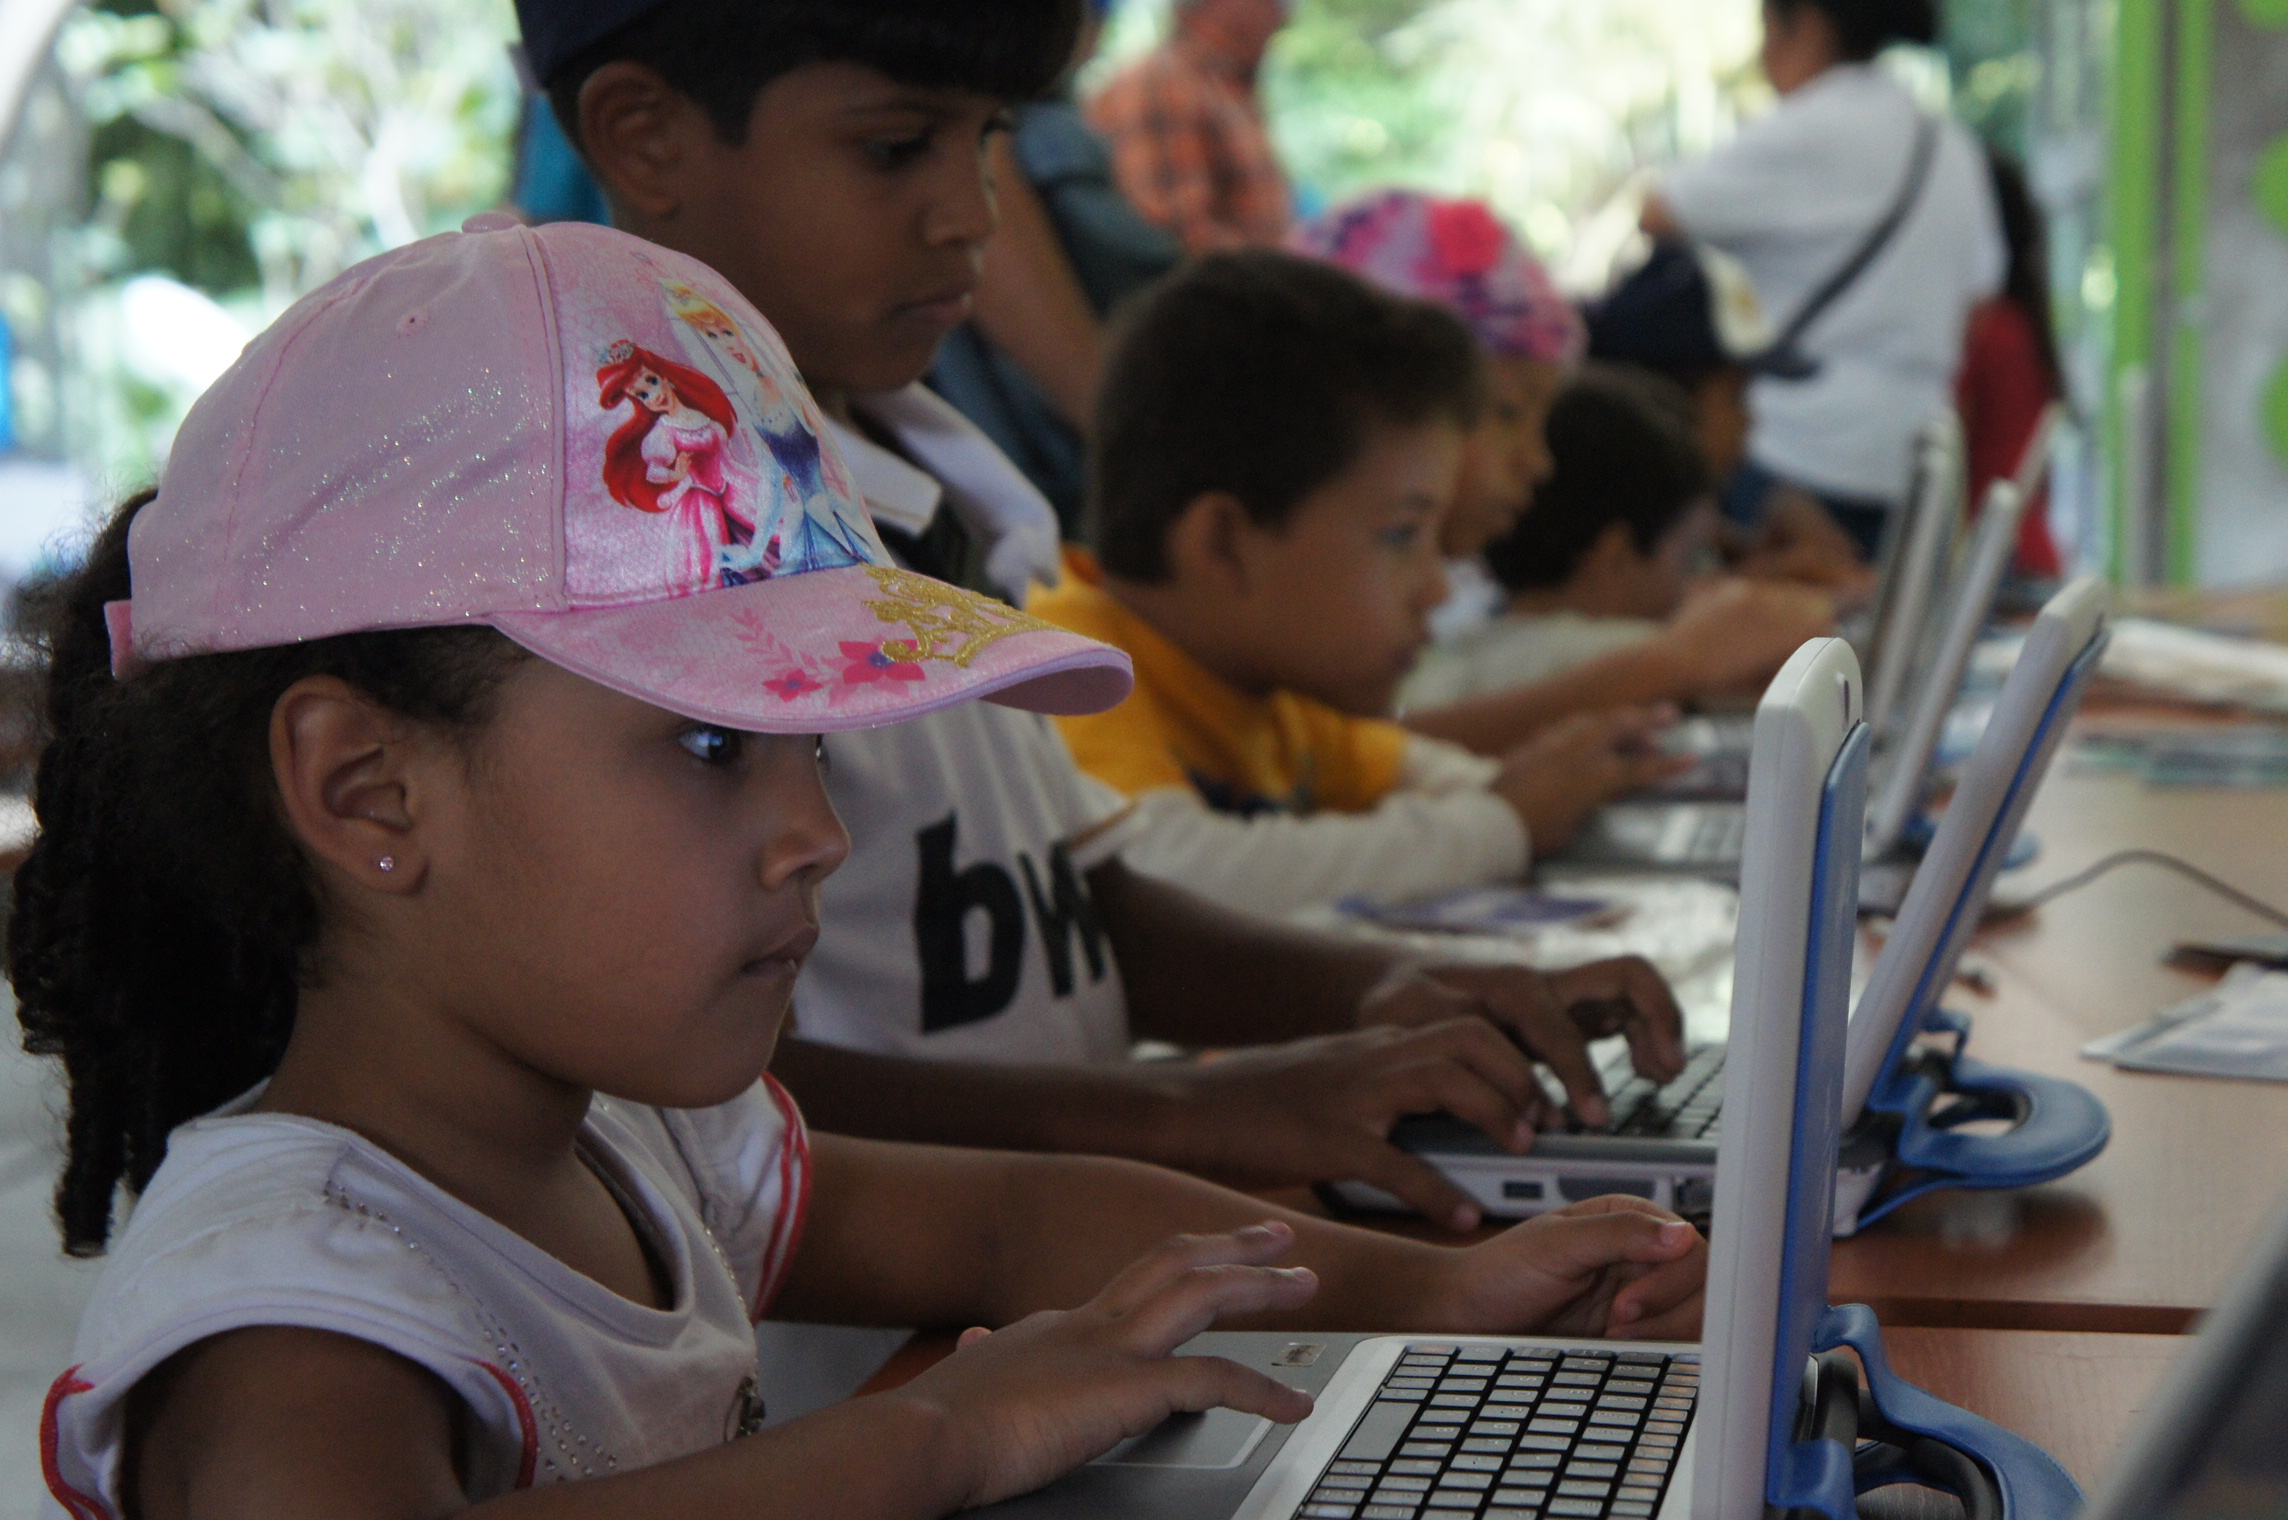 children using computers at a desk with others in the background